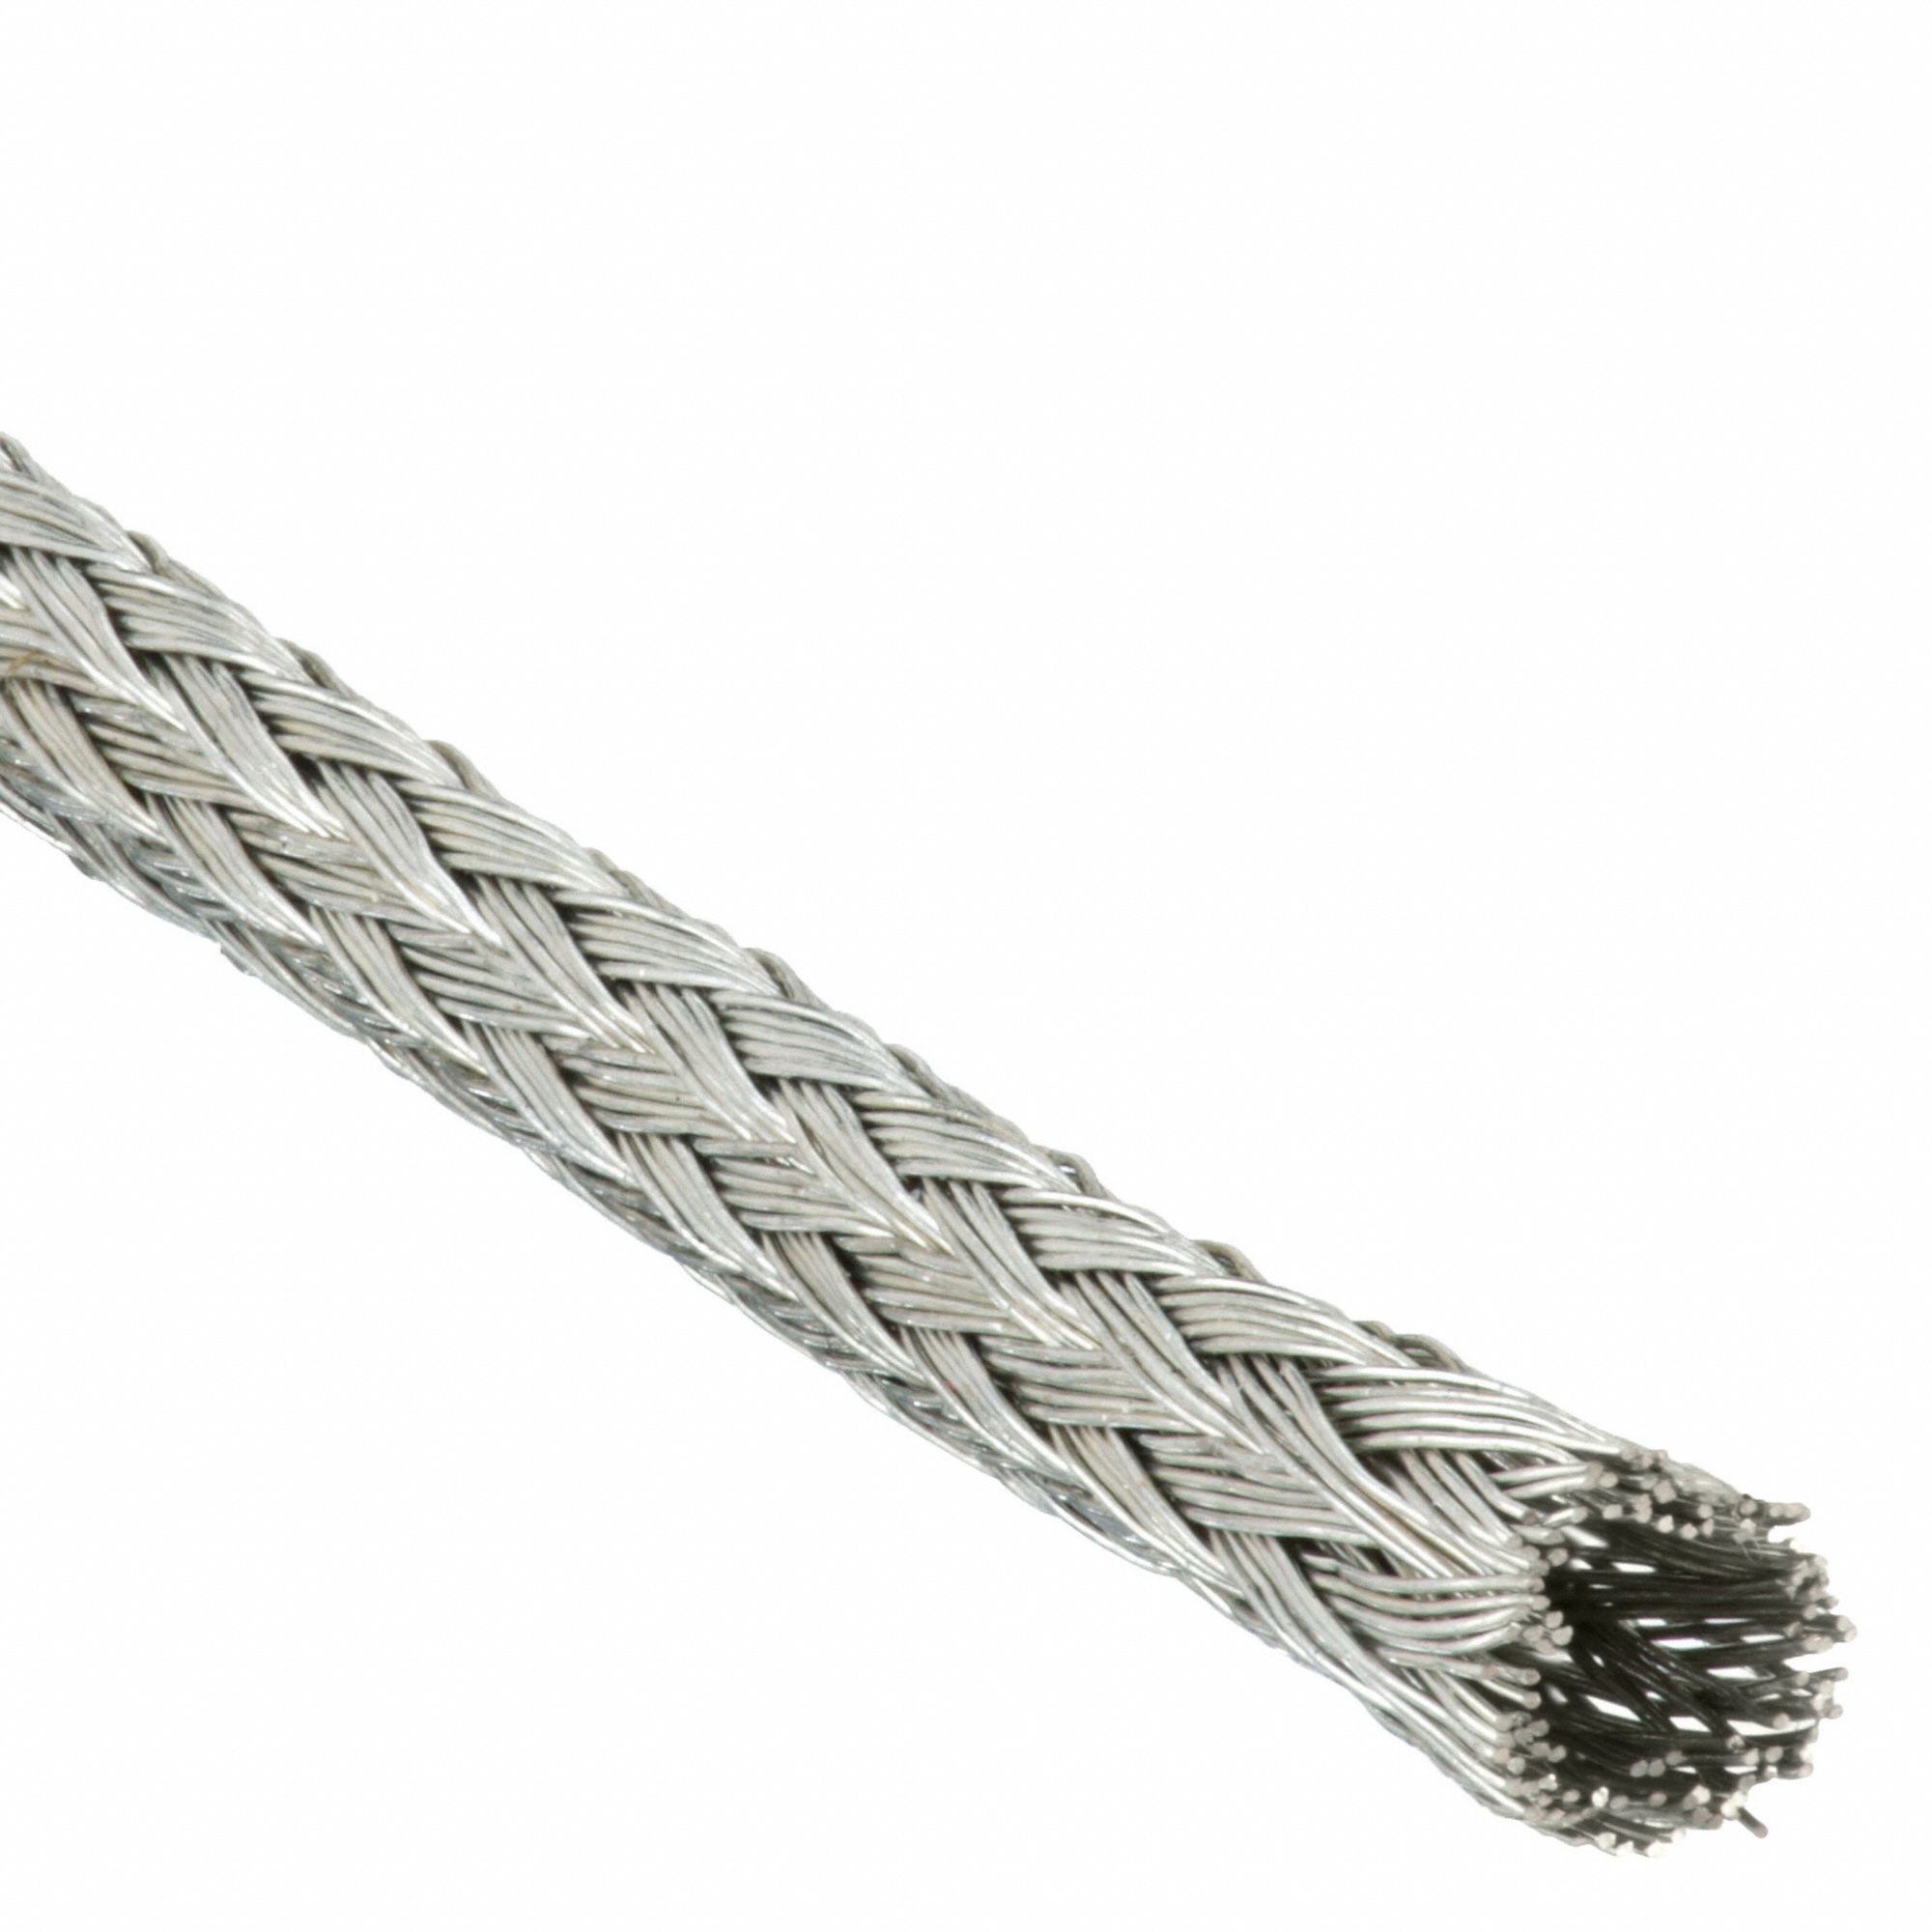 SECURE BRAIDED STEEL PICTURE WIRE SPOOL with 2 pounds 6 ounces REMAINING